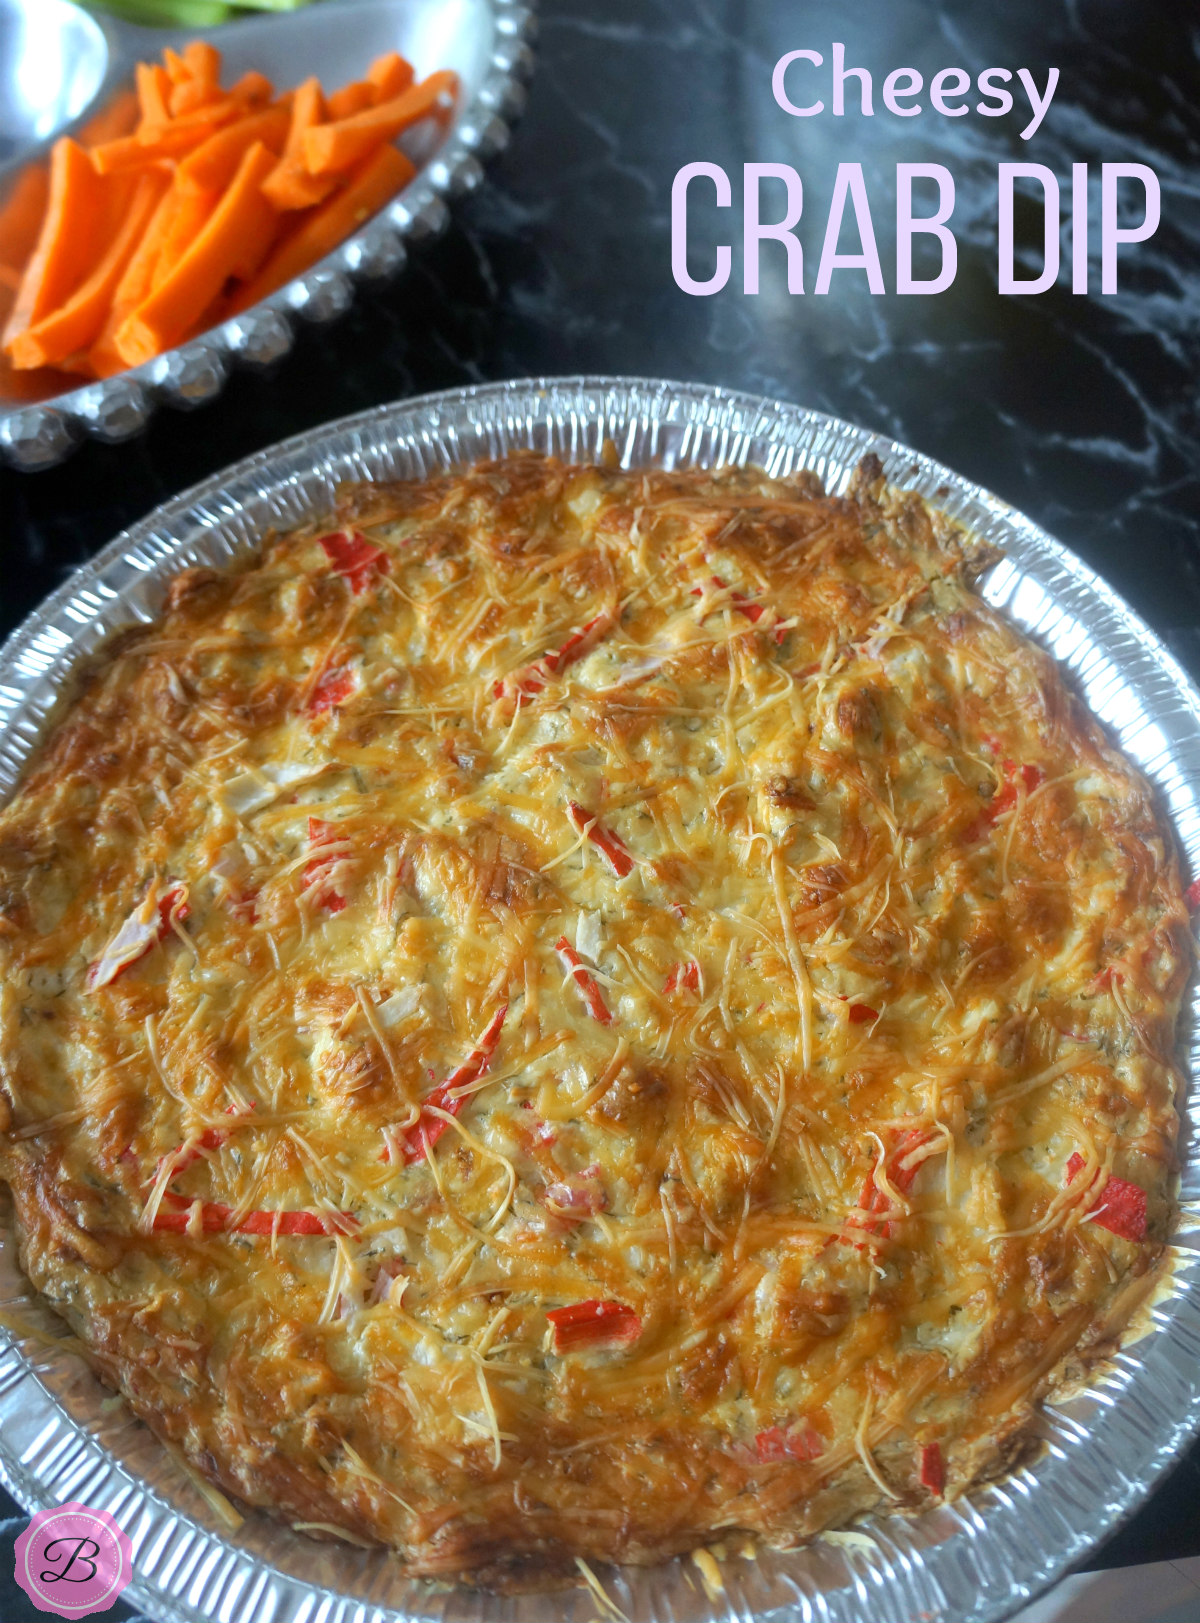 Baked Cheesy Crab Dip in a Pie Pan